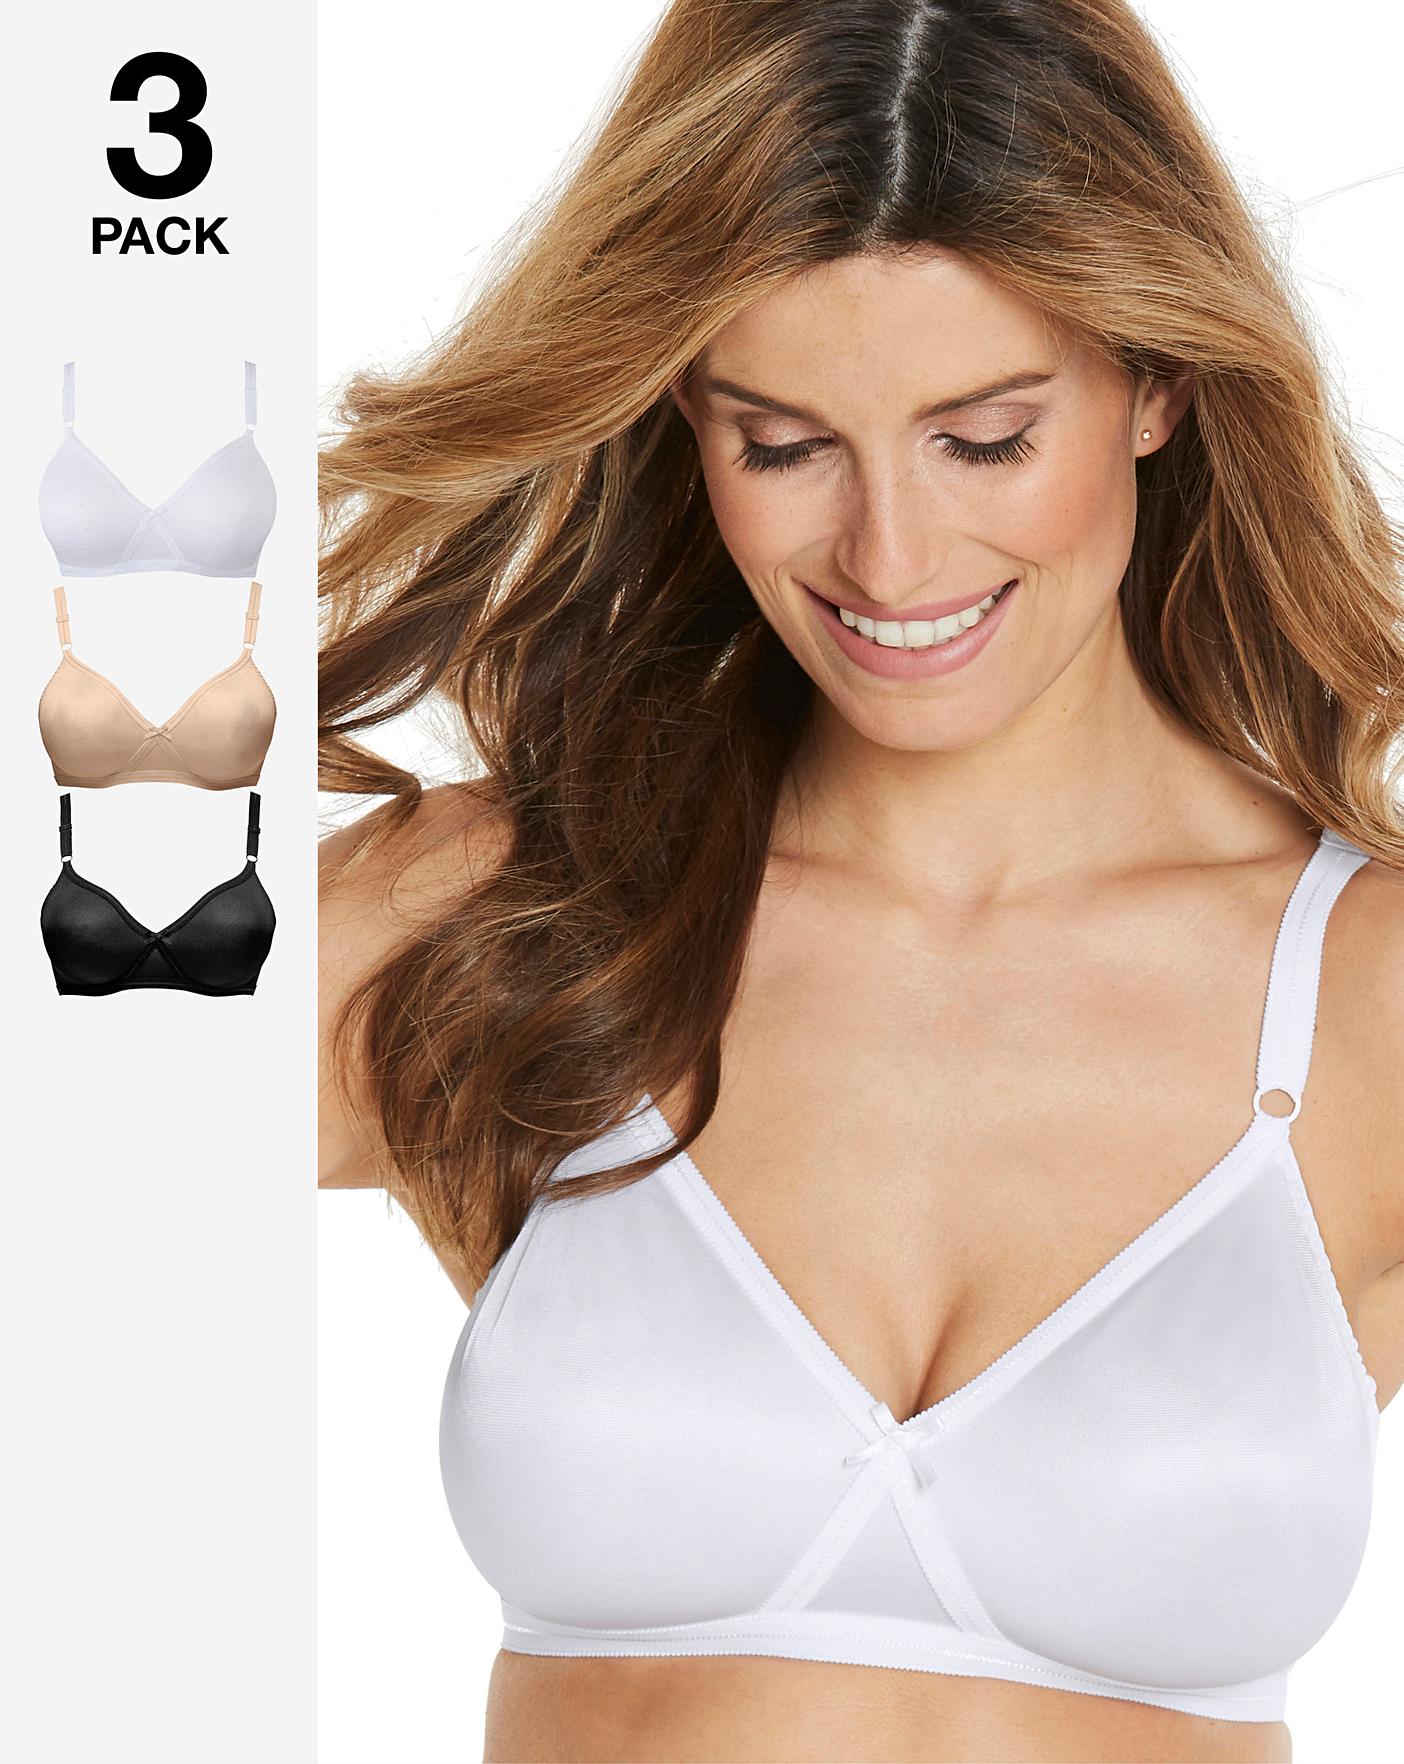 Special Big Size Non Padded Full Coverage Bra (Pack Of 3)